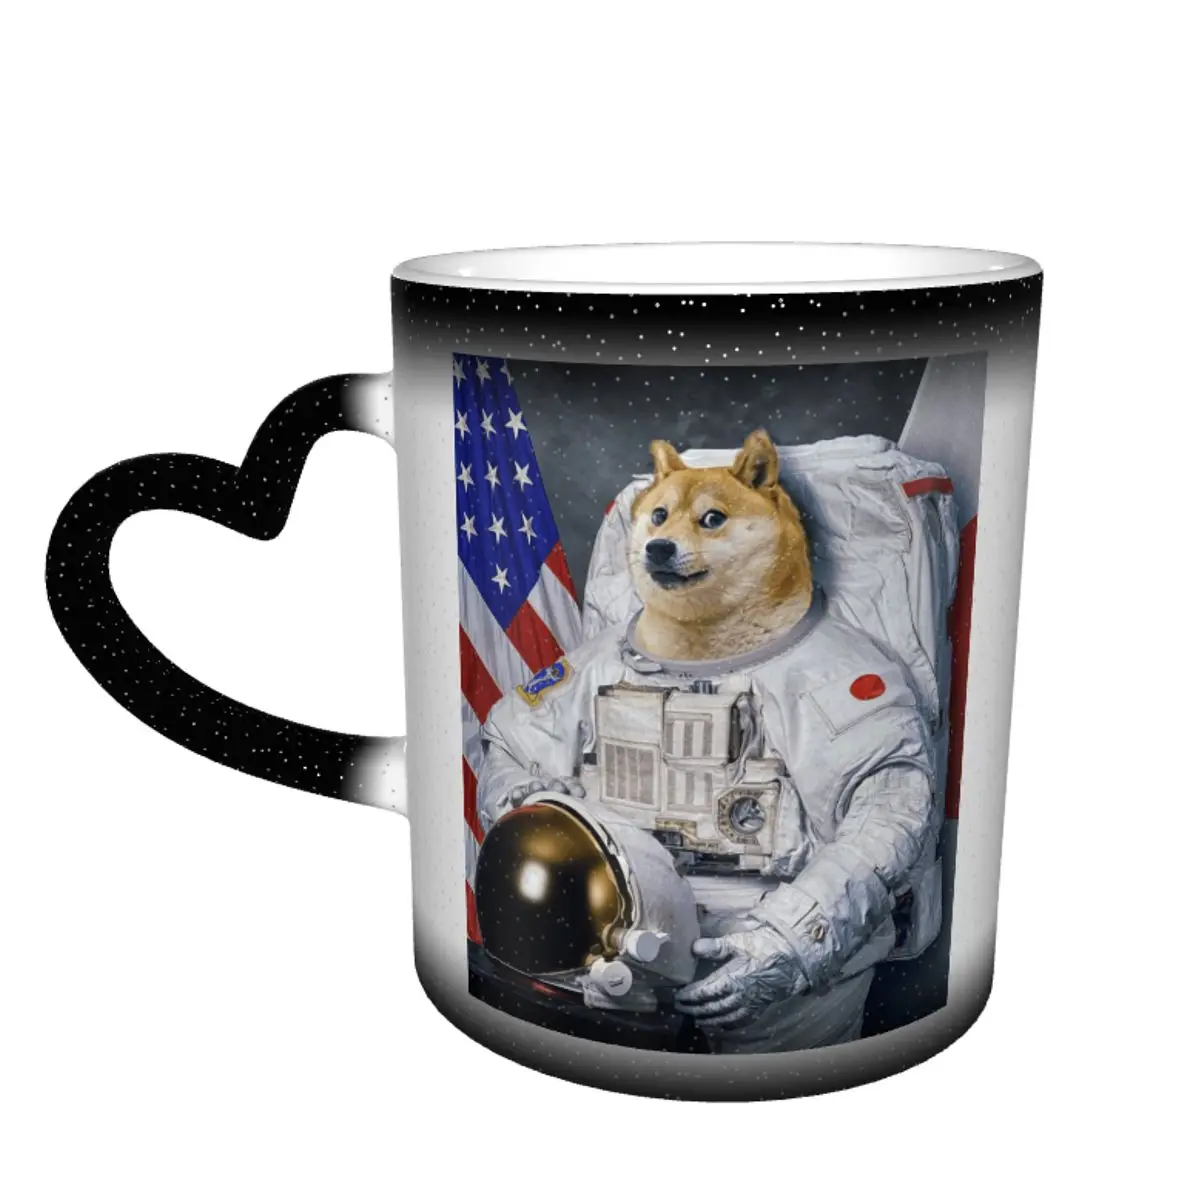 

Dogecoin To The Moon (9) Color Changing Mug in the Sky Top Quality Ceramic Heat-sensitive Cup Nerd Dogecoin Hodl Beer mugs